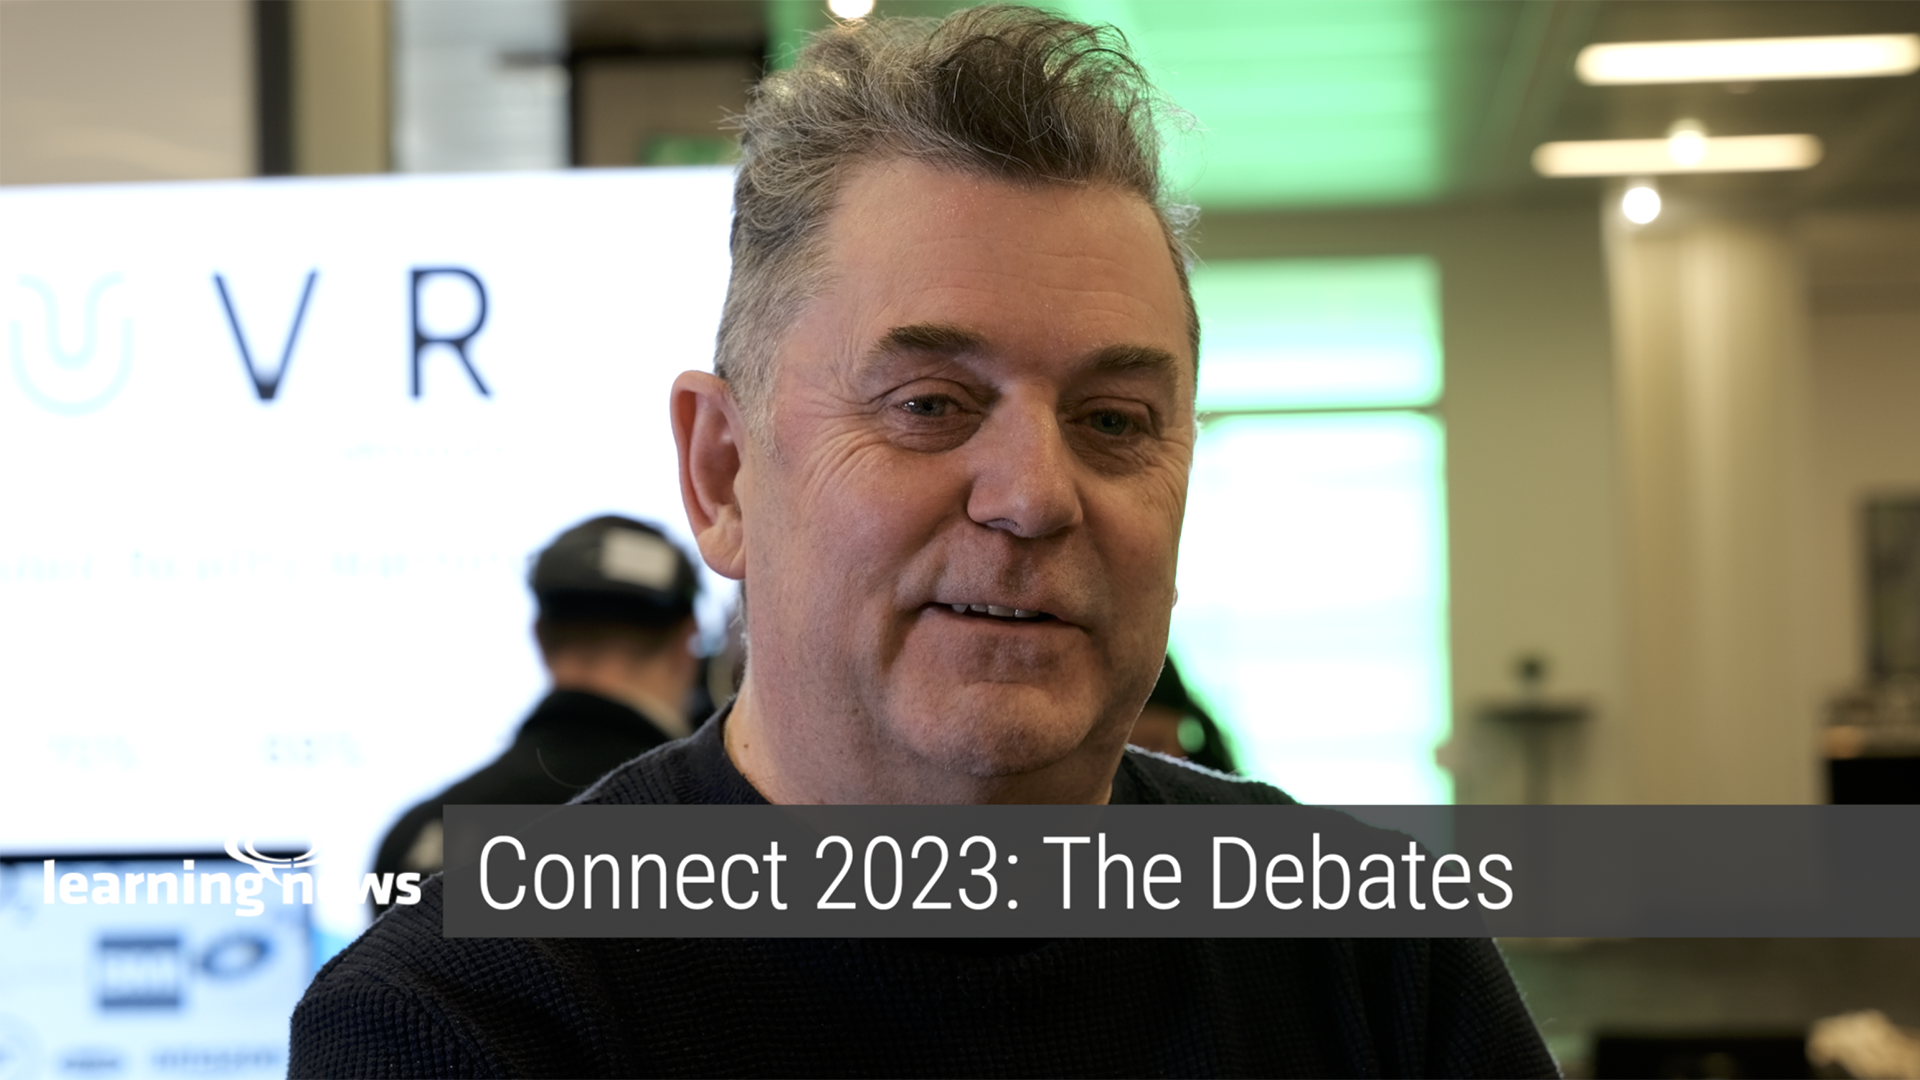 Connect 2023 opened with a keynote from Learning Innovation Consultant, Steve Wheeler, on artificial intelligence